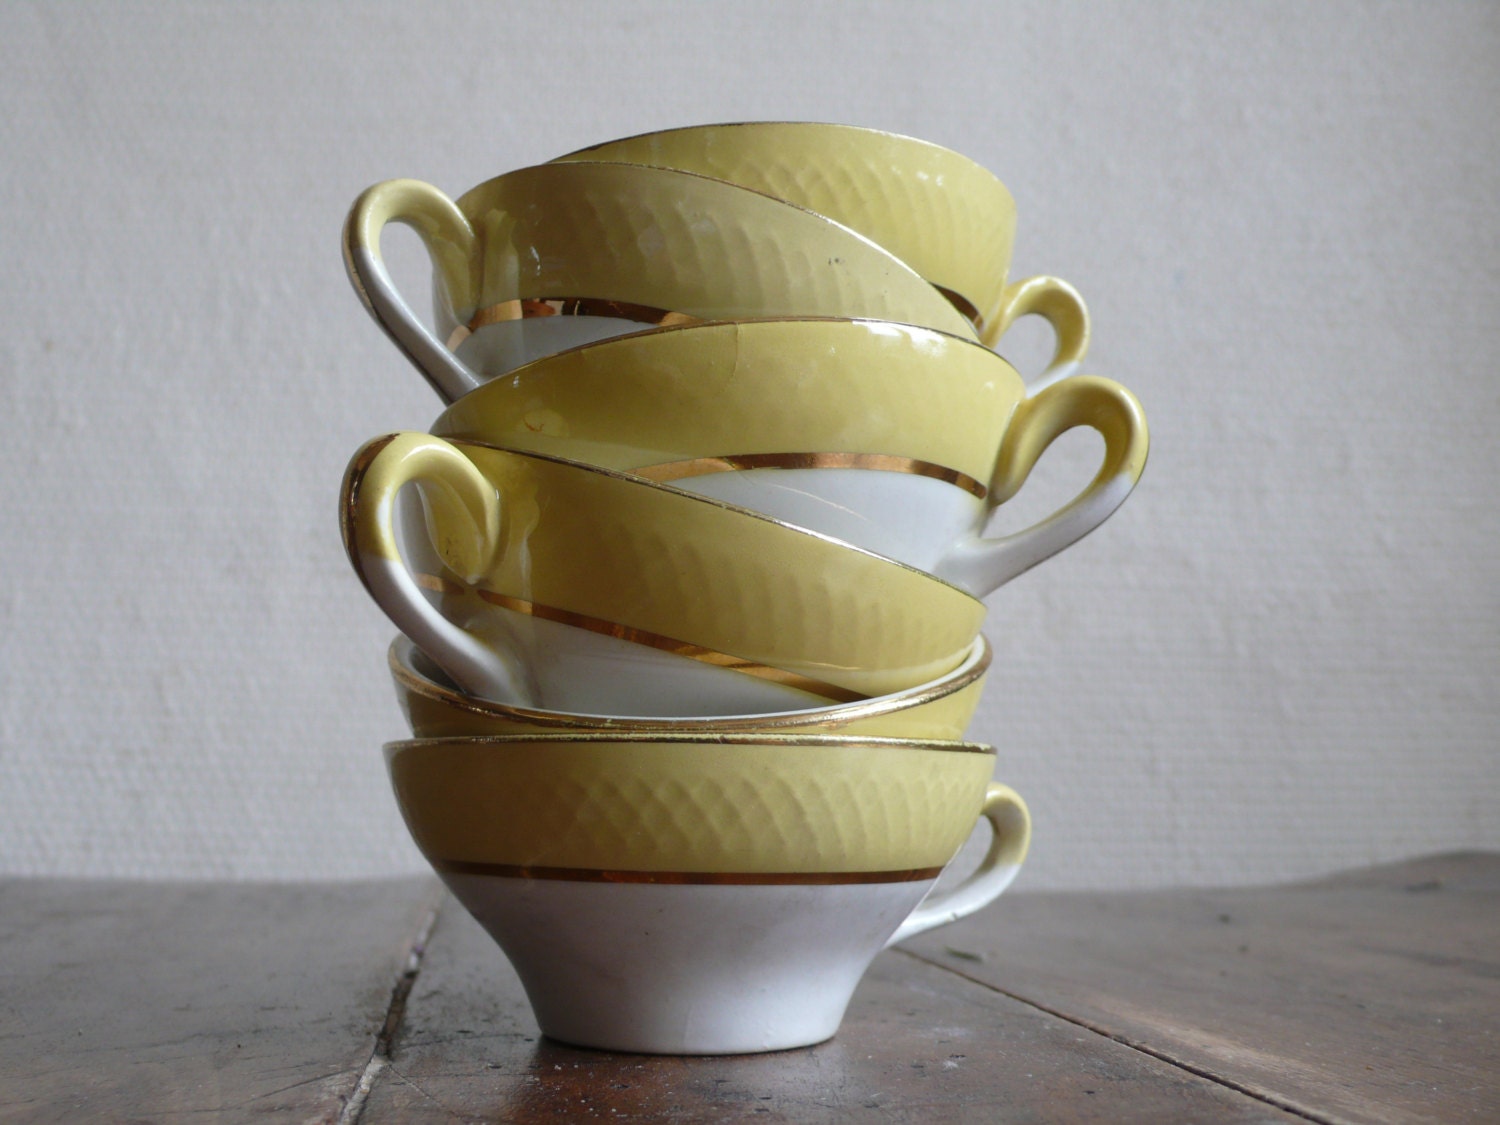 french vintage cups, espresso, yellow and white, gold,  tea, hot chocolate, antique,  French vintage housewares by ancienesthetique on etsy - ancienesthetique